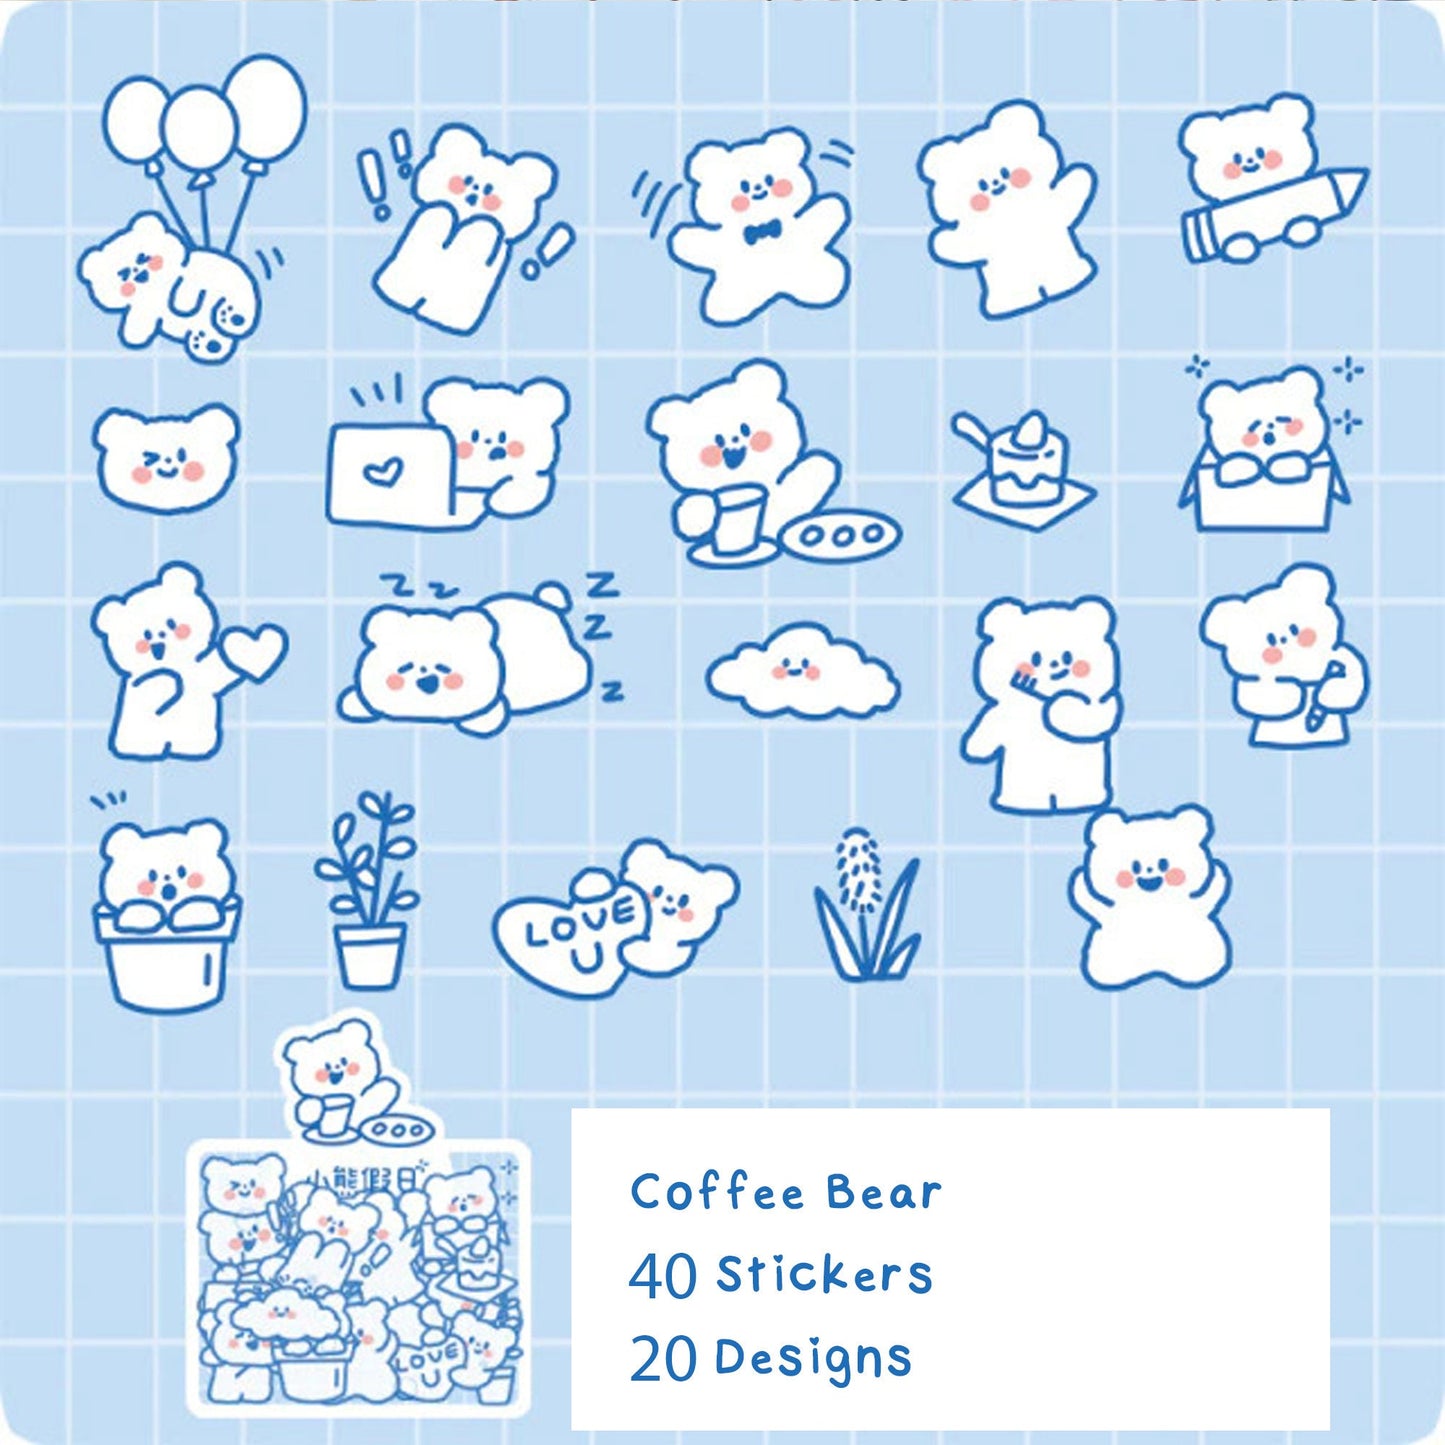 Kawaii Planner Stickers - Cute Stickers - Bunny and Bear Stickers - Kawaii stickers - Journal Flakes Stickers, Clear Stickers - b2i2